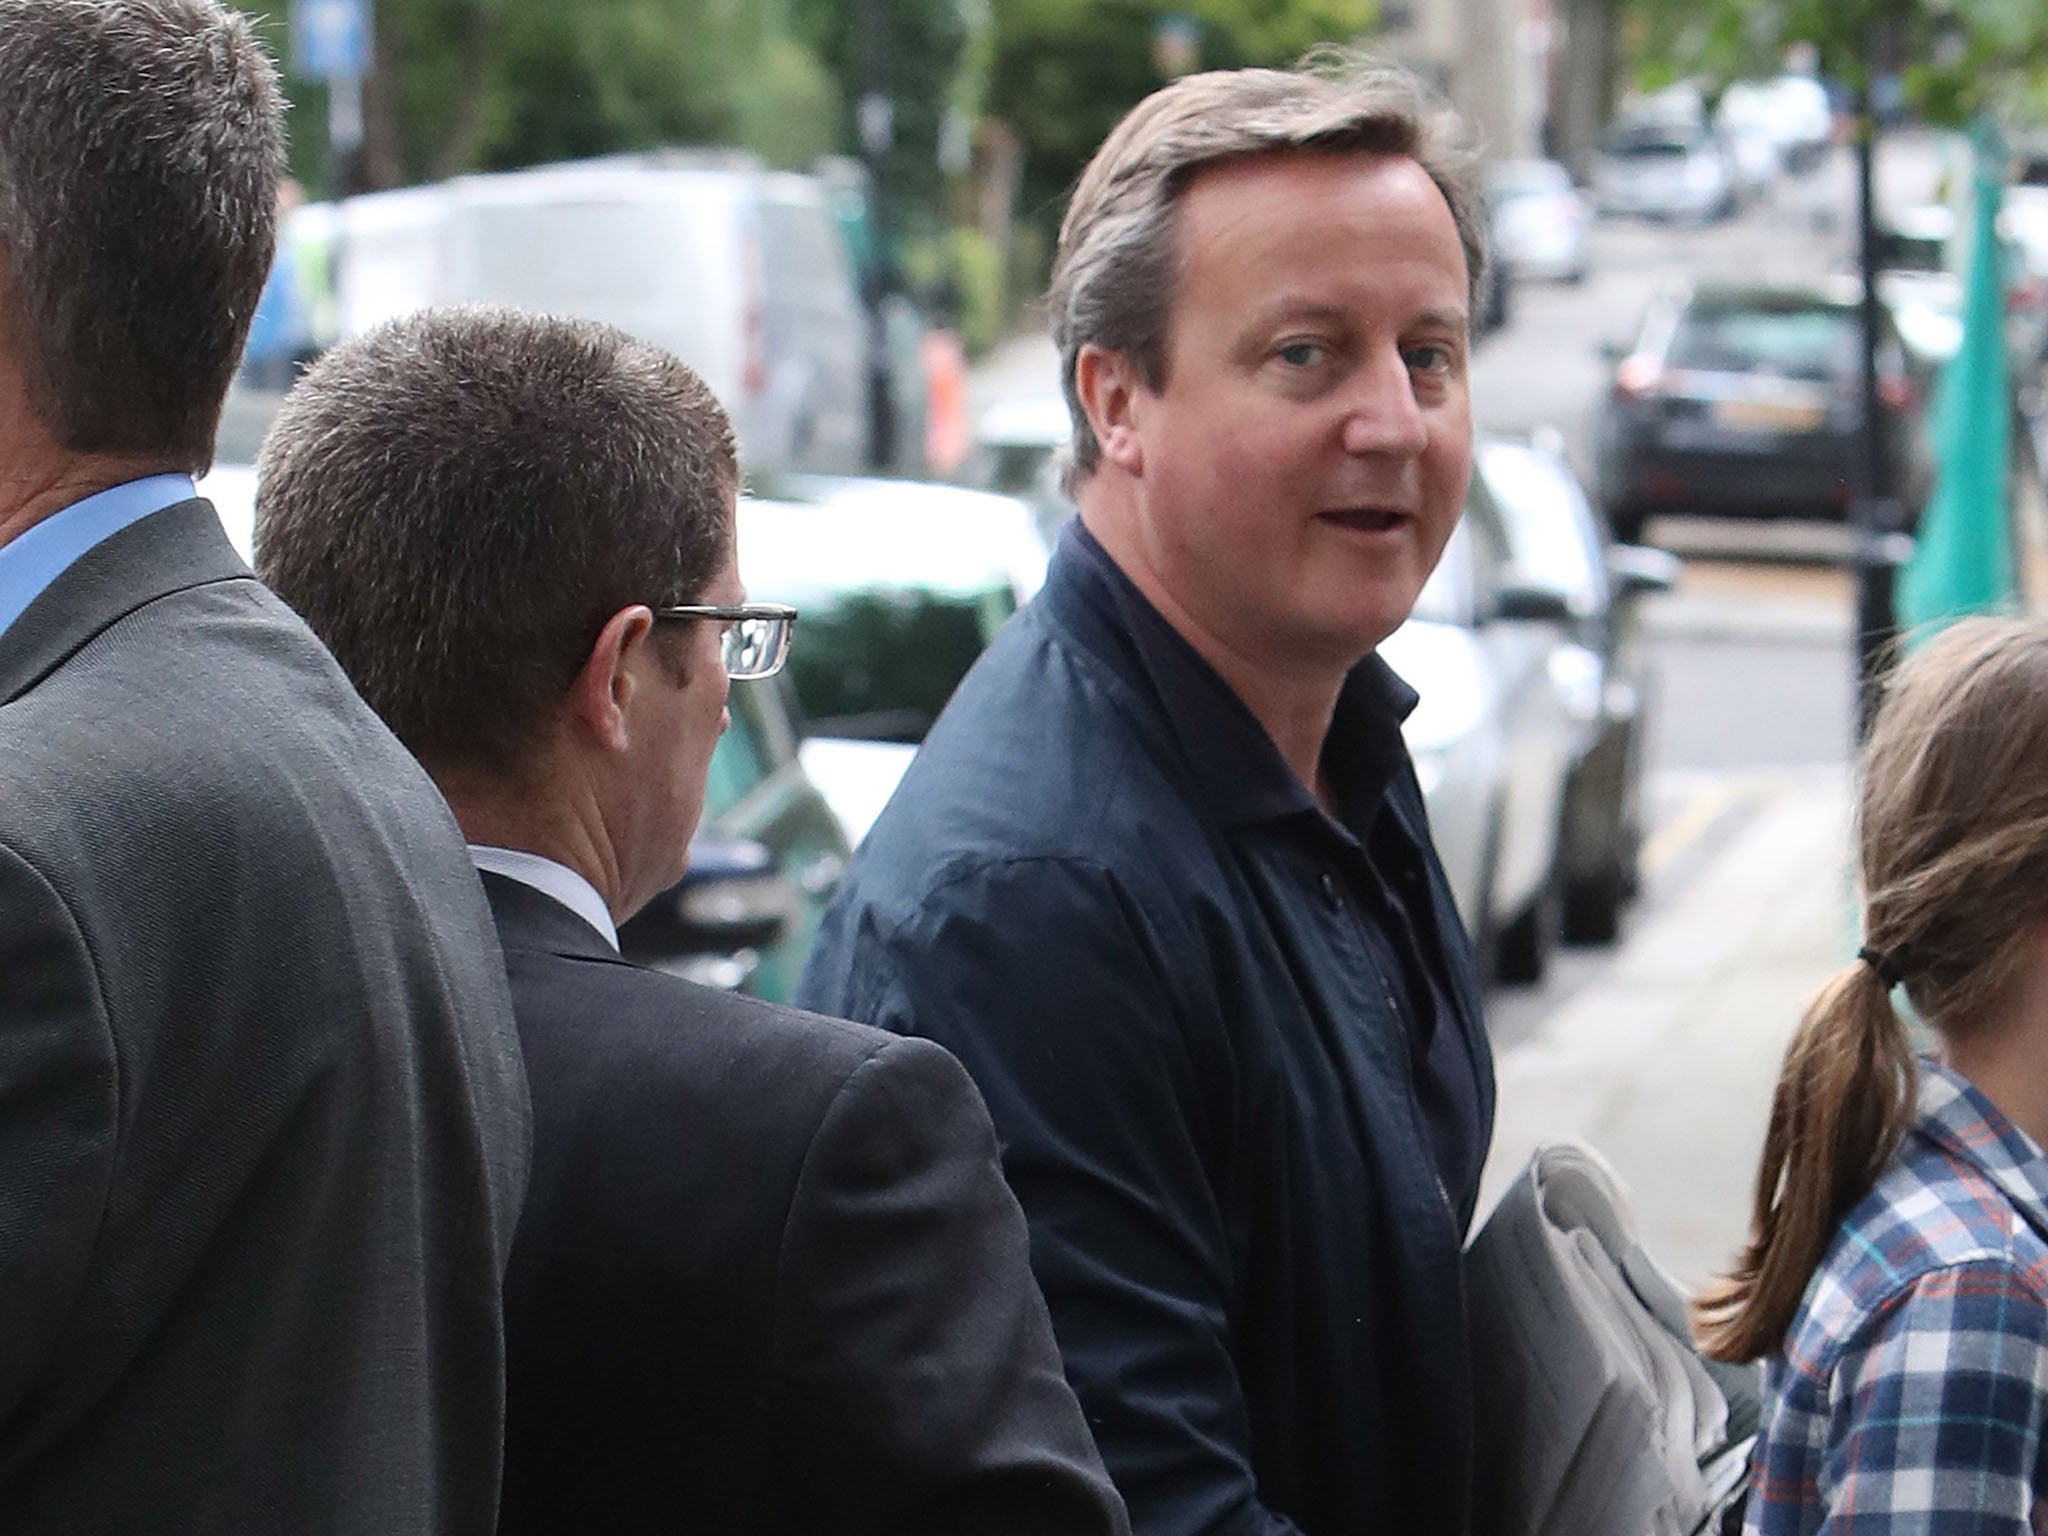 David Cameron's attempt at a dignified exit in June was soured by his resignation honours list